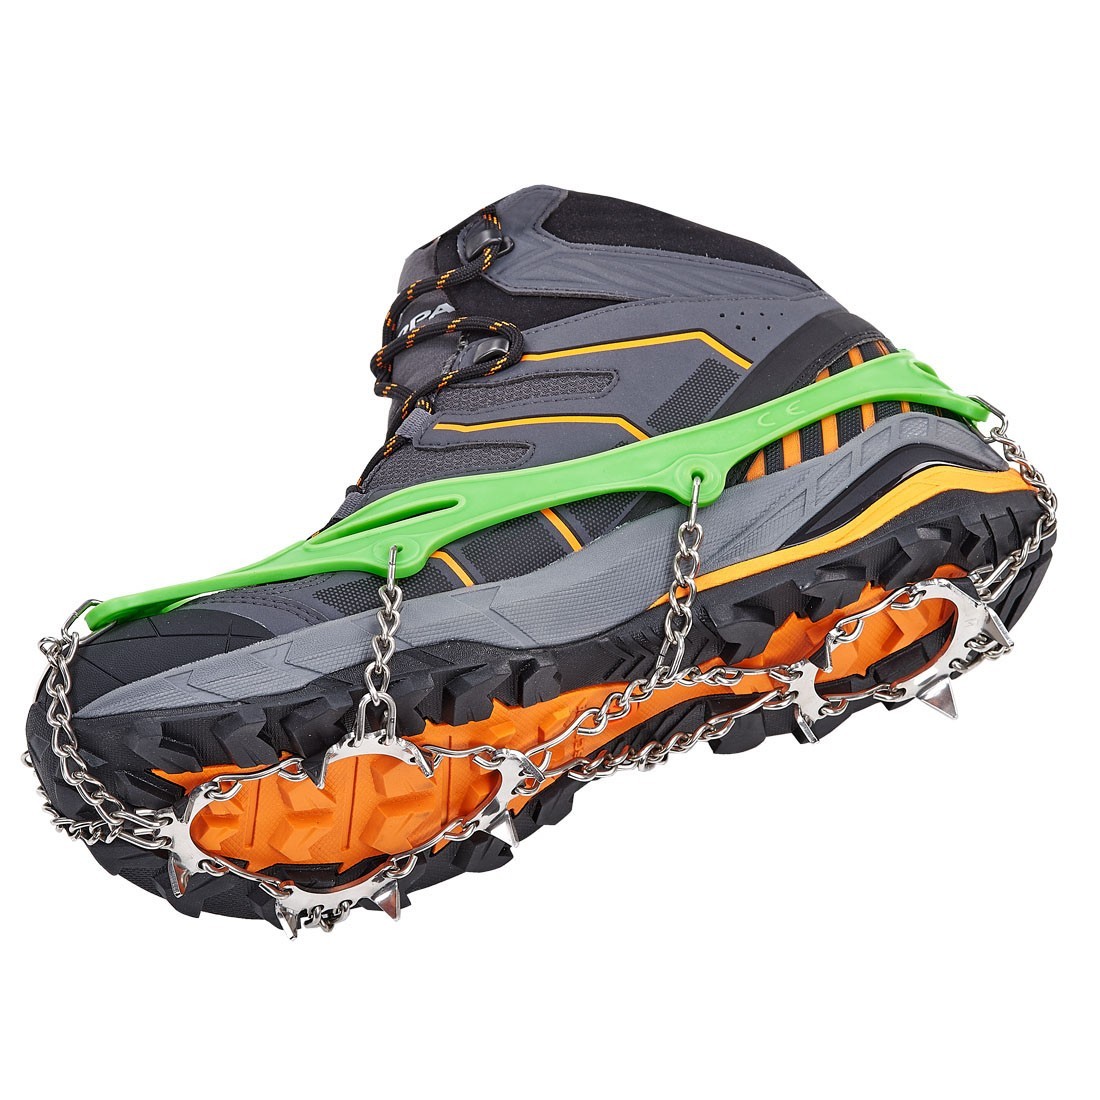 ICE CRAMPONS LIGHT - Ramponcini con 13 punte